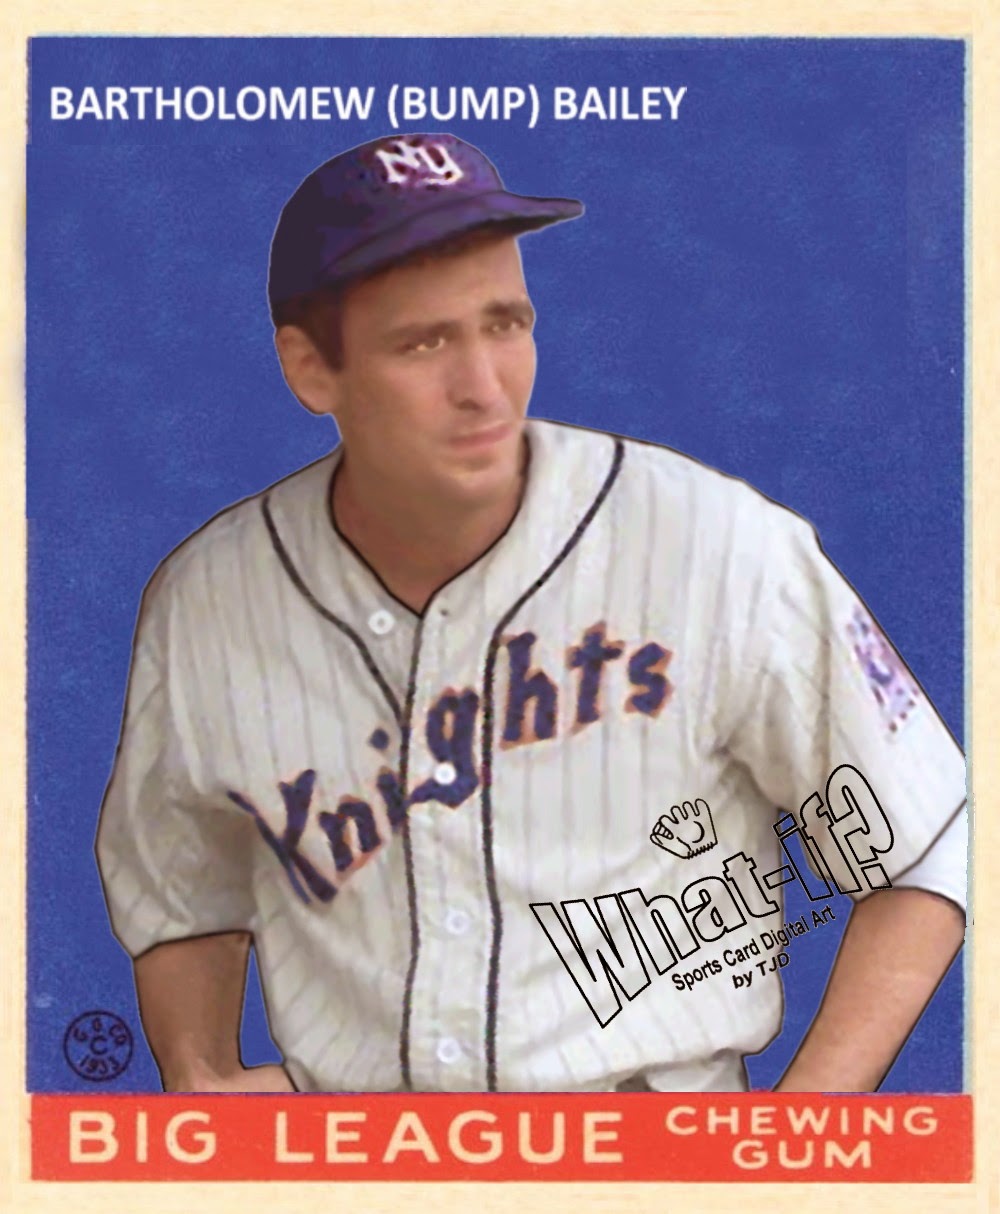 Billy Chapel Custom Baseball Card for Love of the Game Kevin Costner 